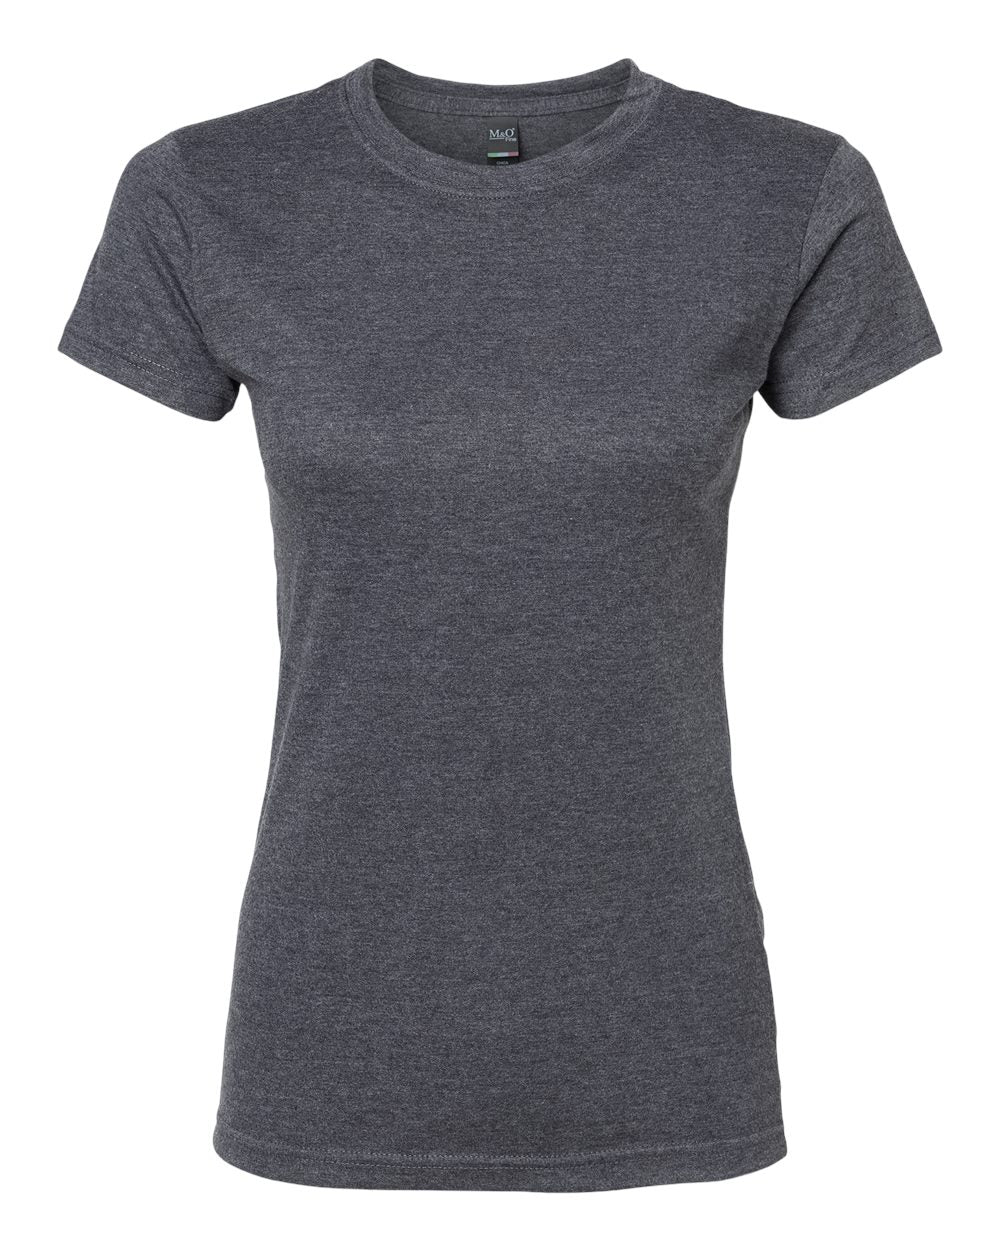 M&O Women's Fine Jersey T-Shirt 4513 #color_Heather Charcoal